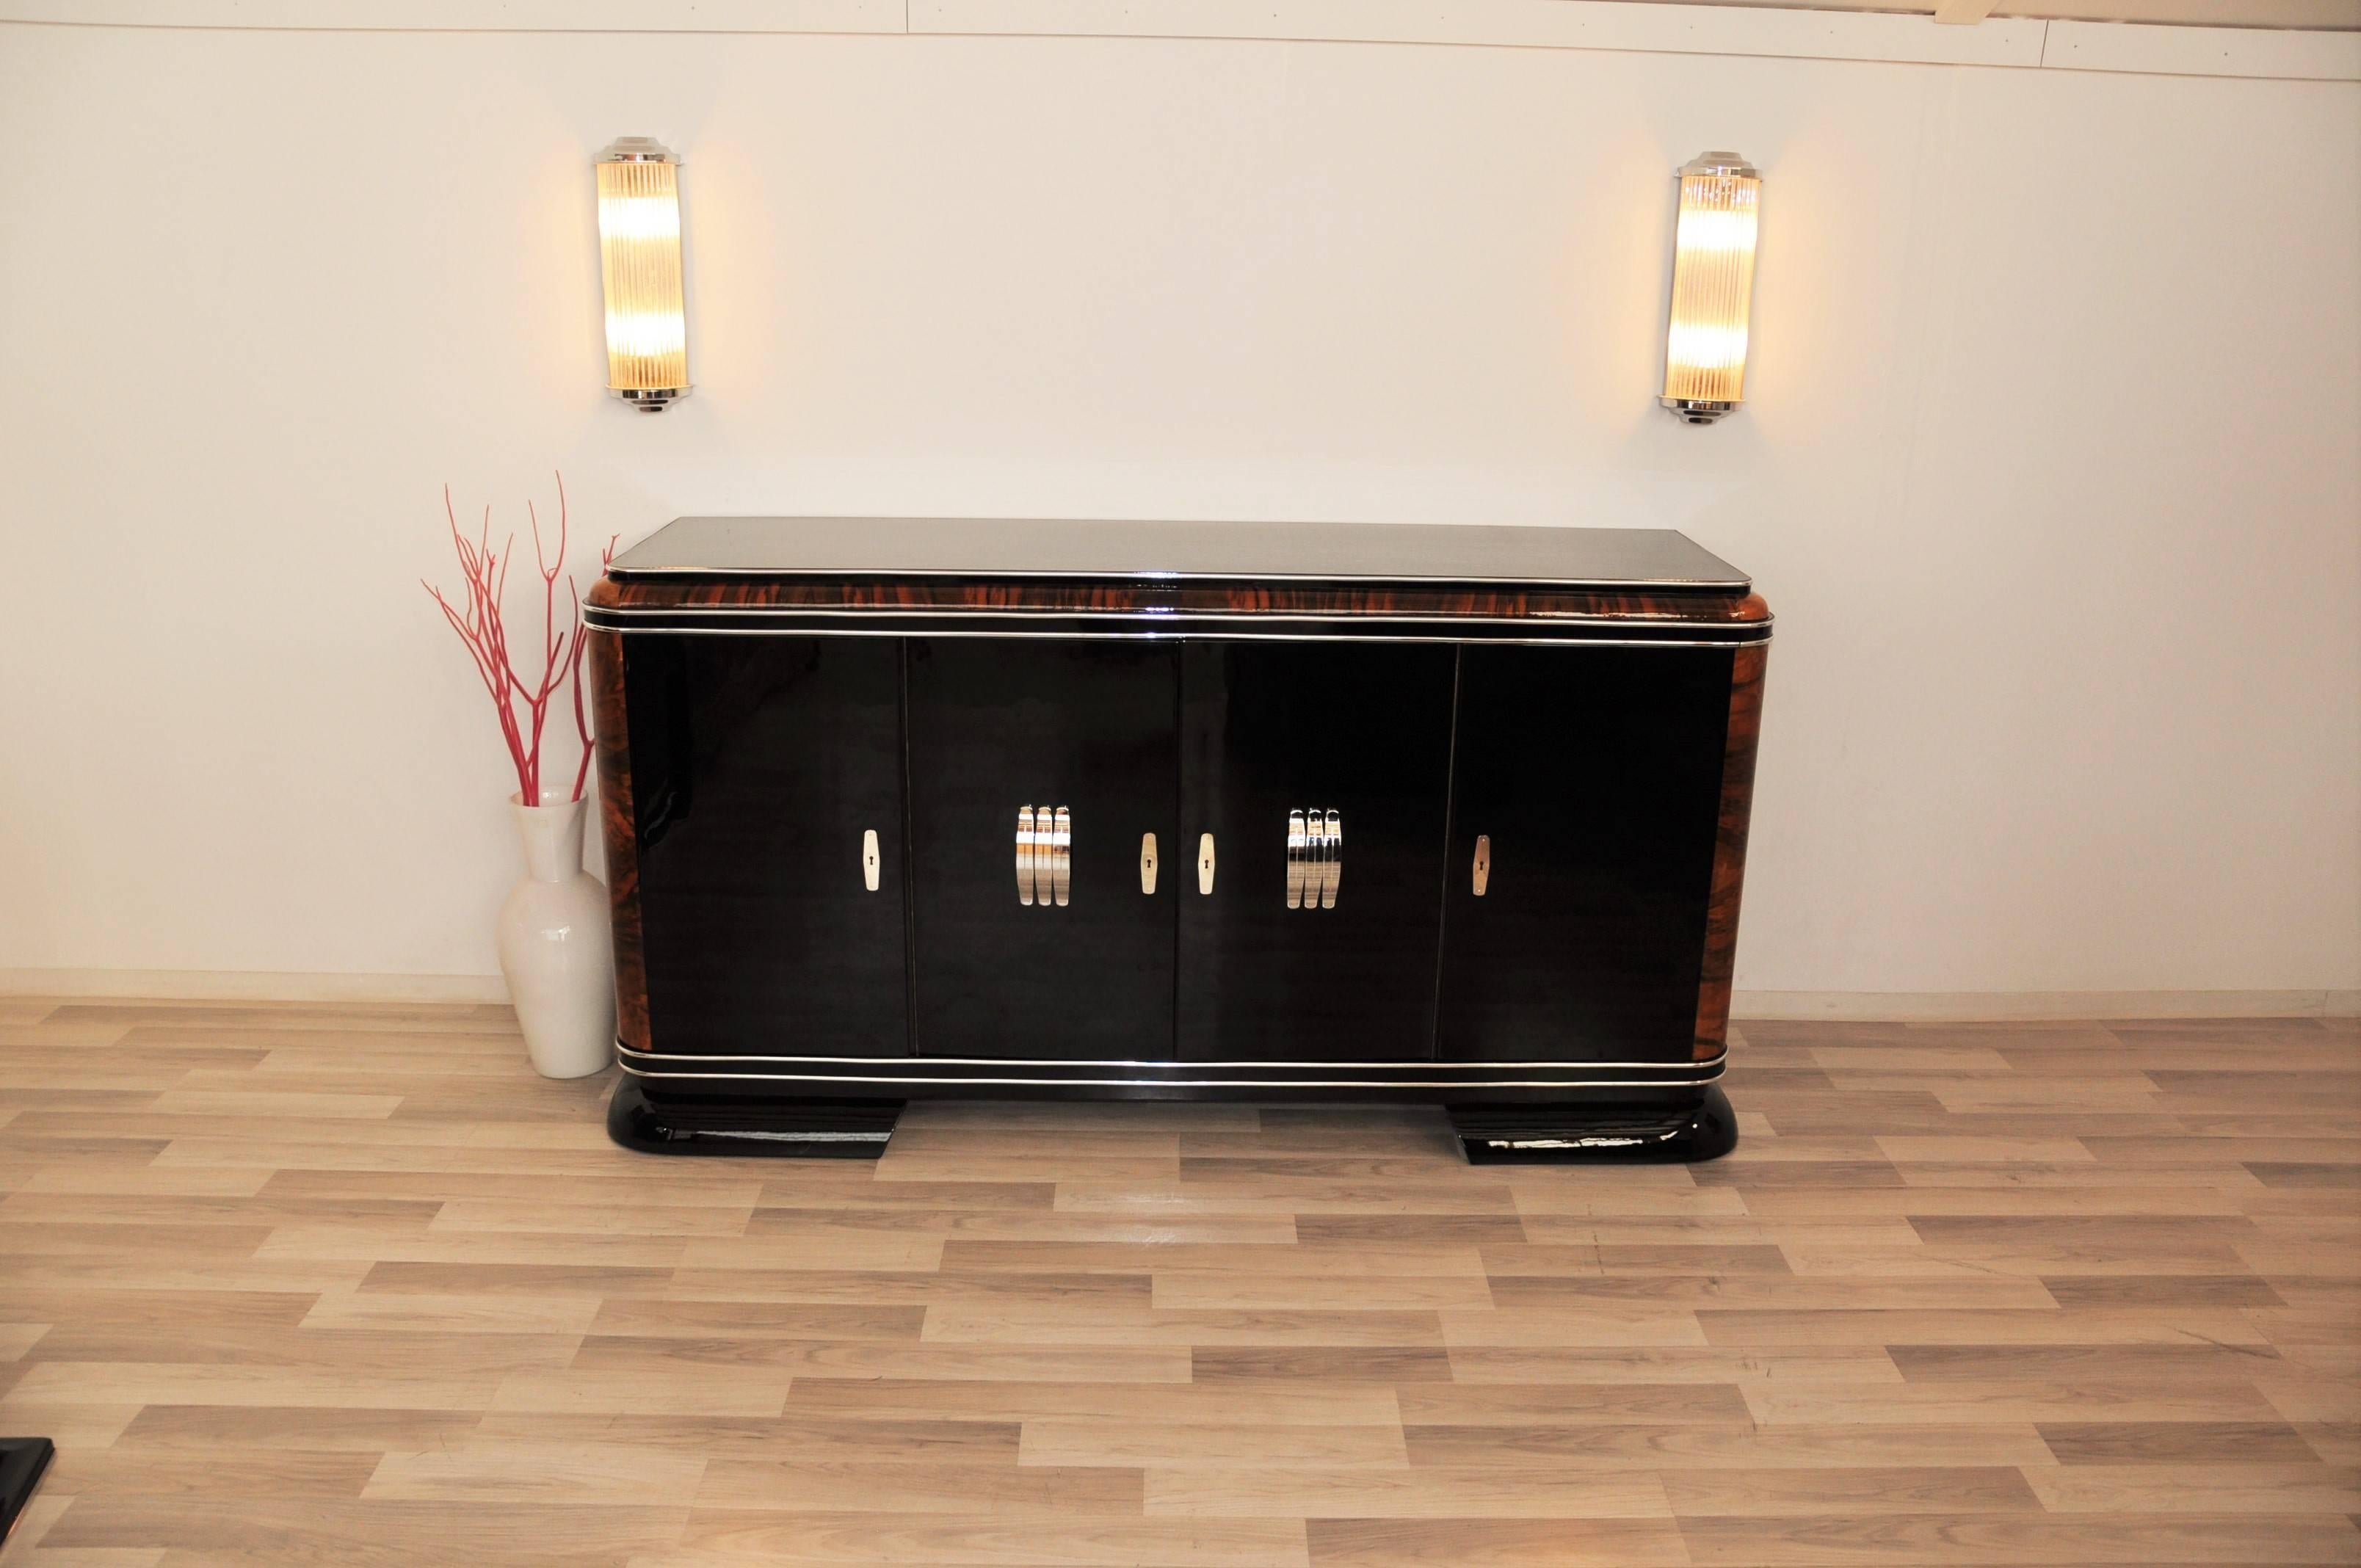 Wonderful piano lacquer sideboard with mahogany details and big chrome handles. The combination of luxurious mahogany, high quality piano lacquer and big chrome handles offers a unmistakable design!

Big sideboard / buffet with fine